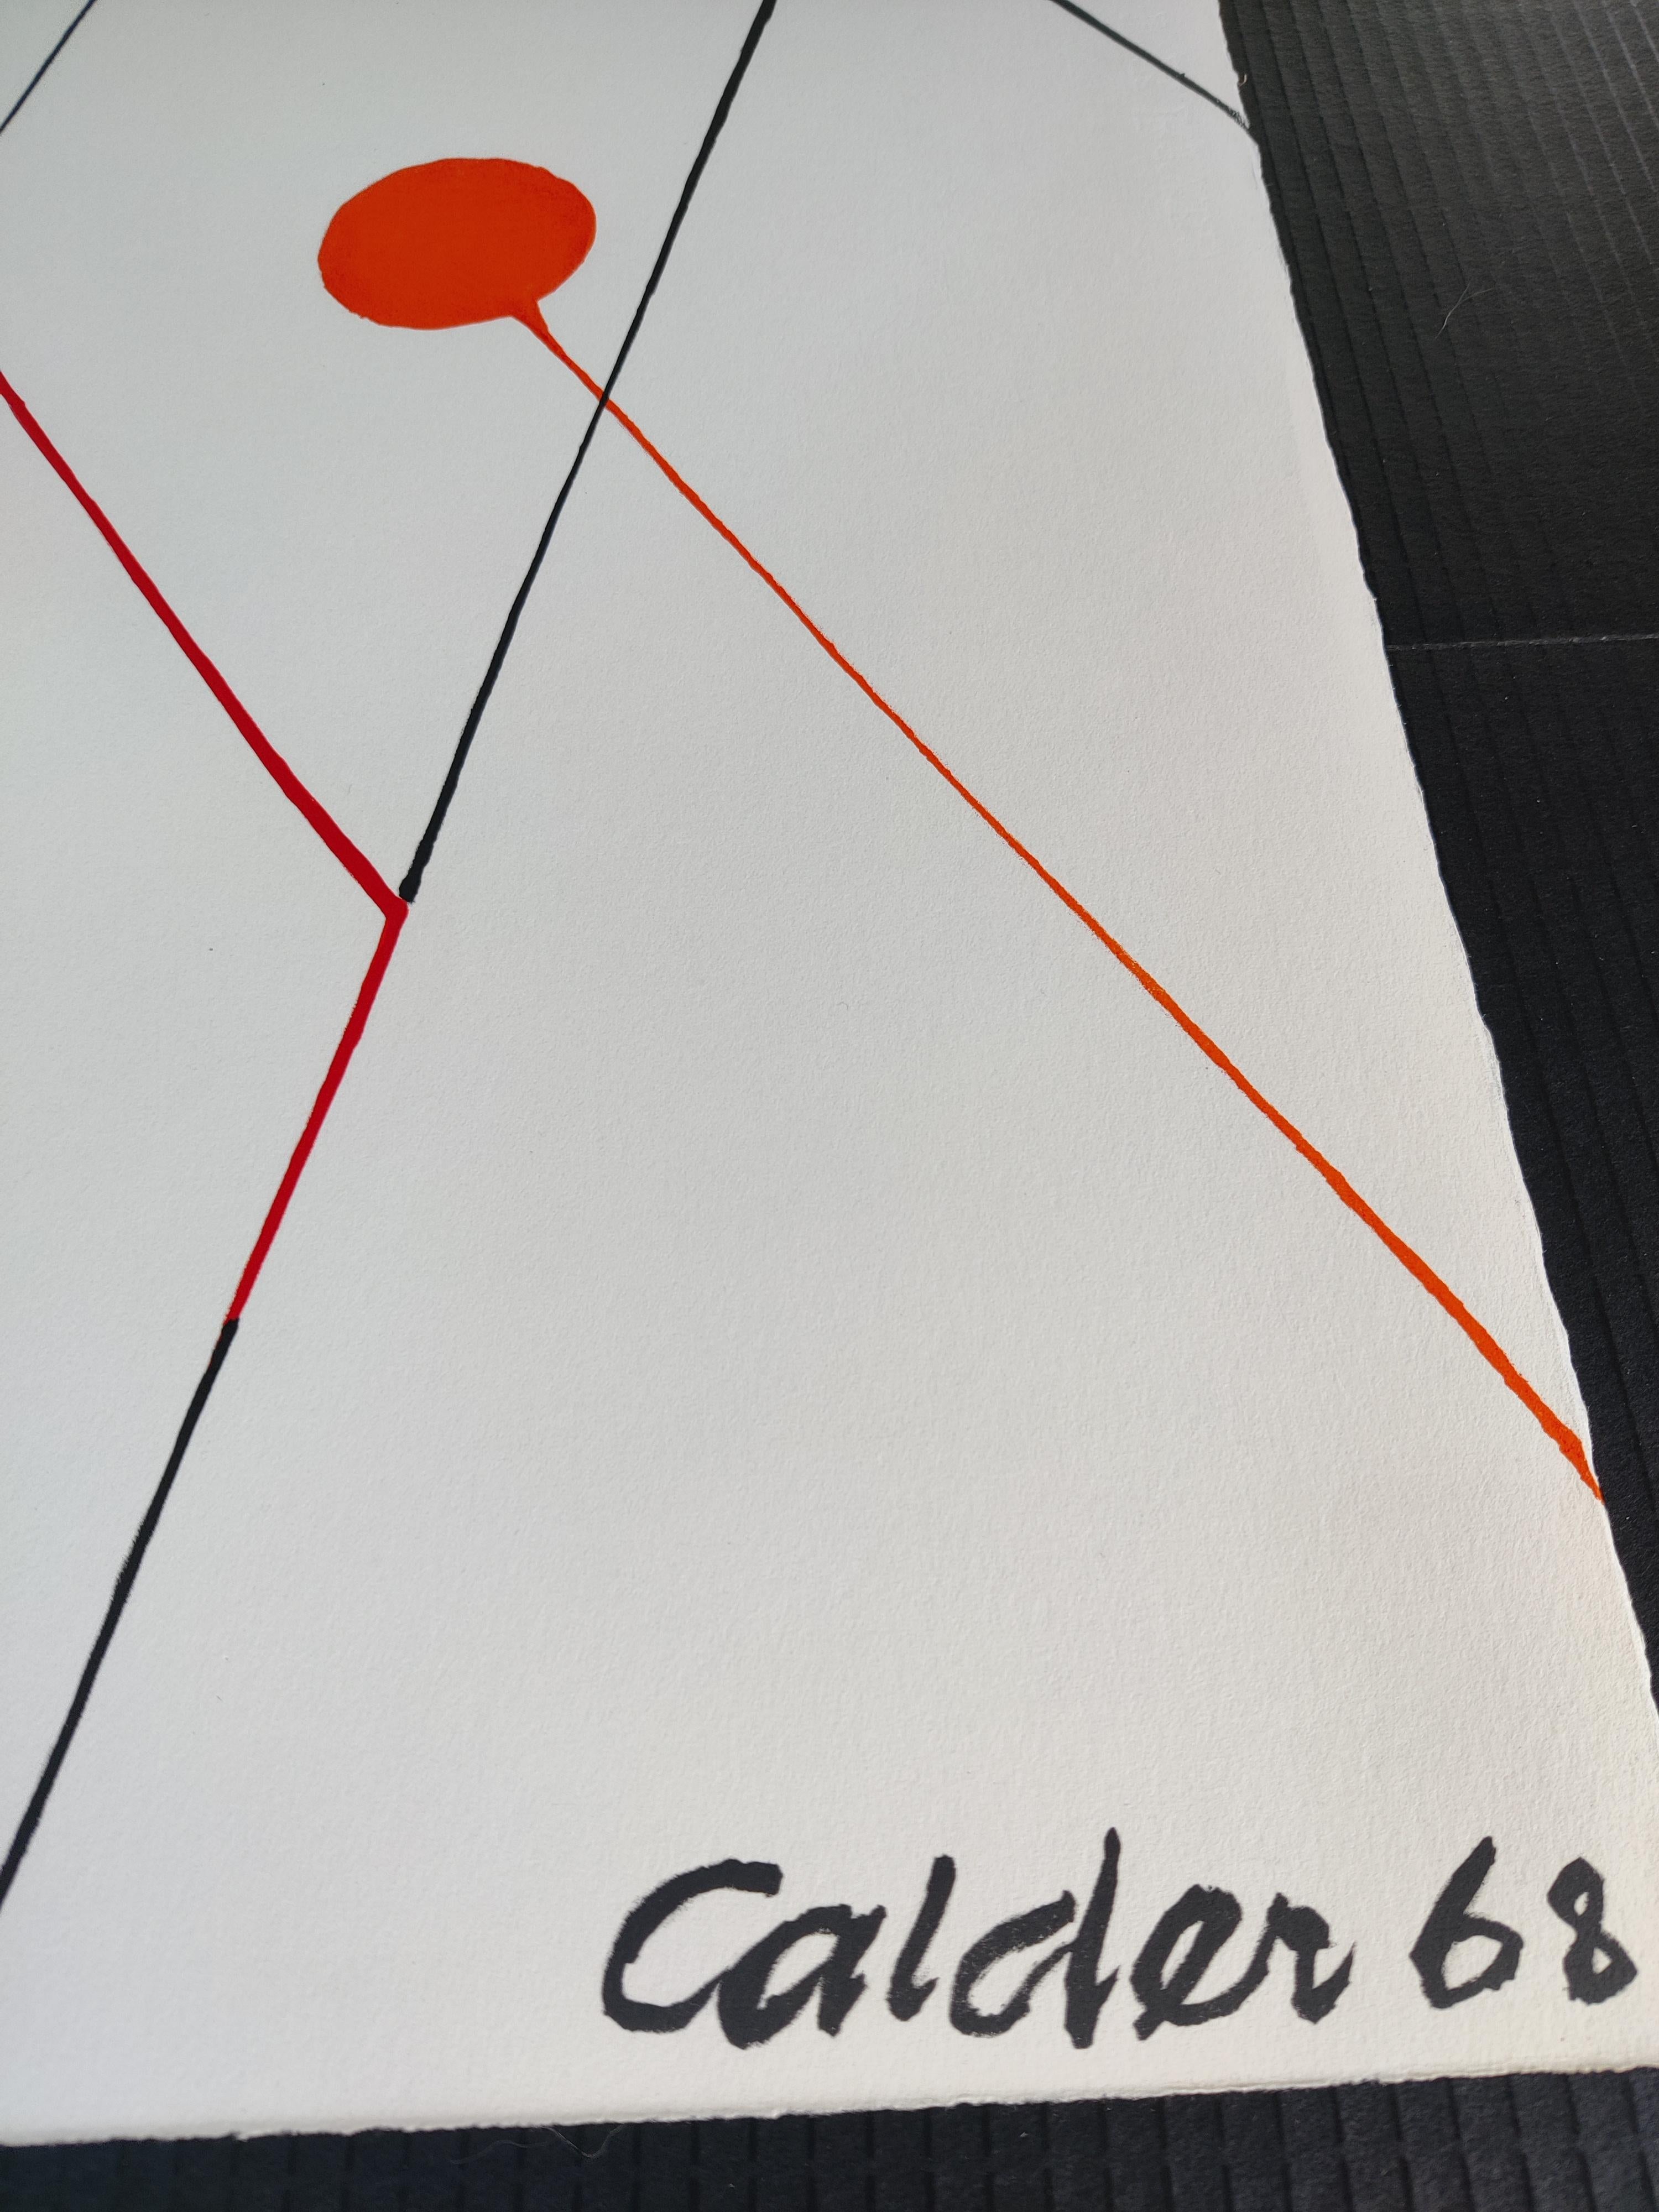 Alexander Calder 68 Lithograph Balloons In Good Condition For Sale In Cincinnati, OH